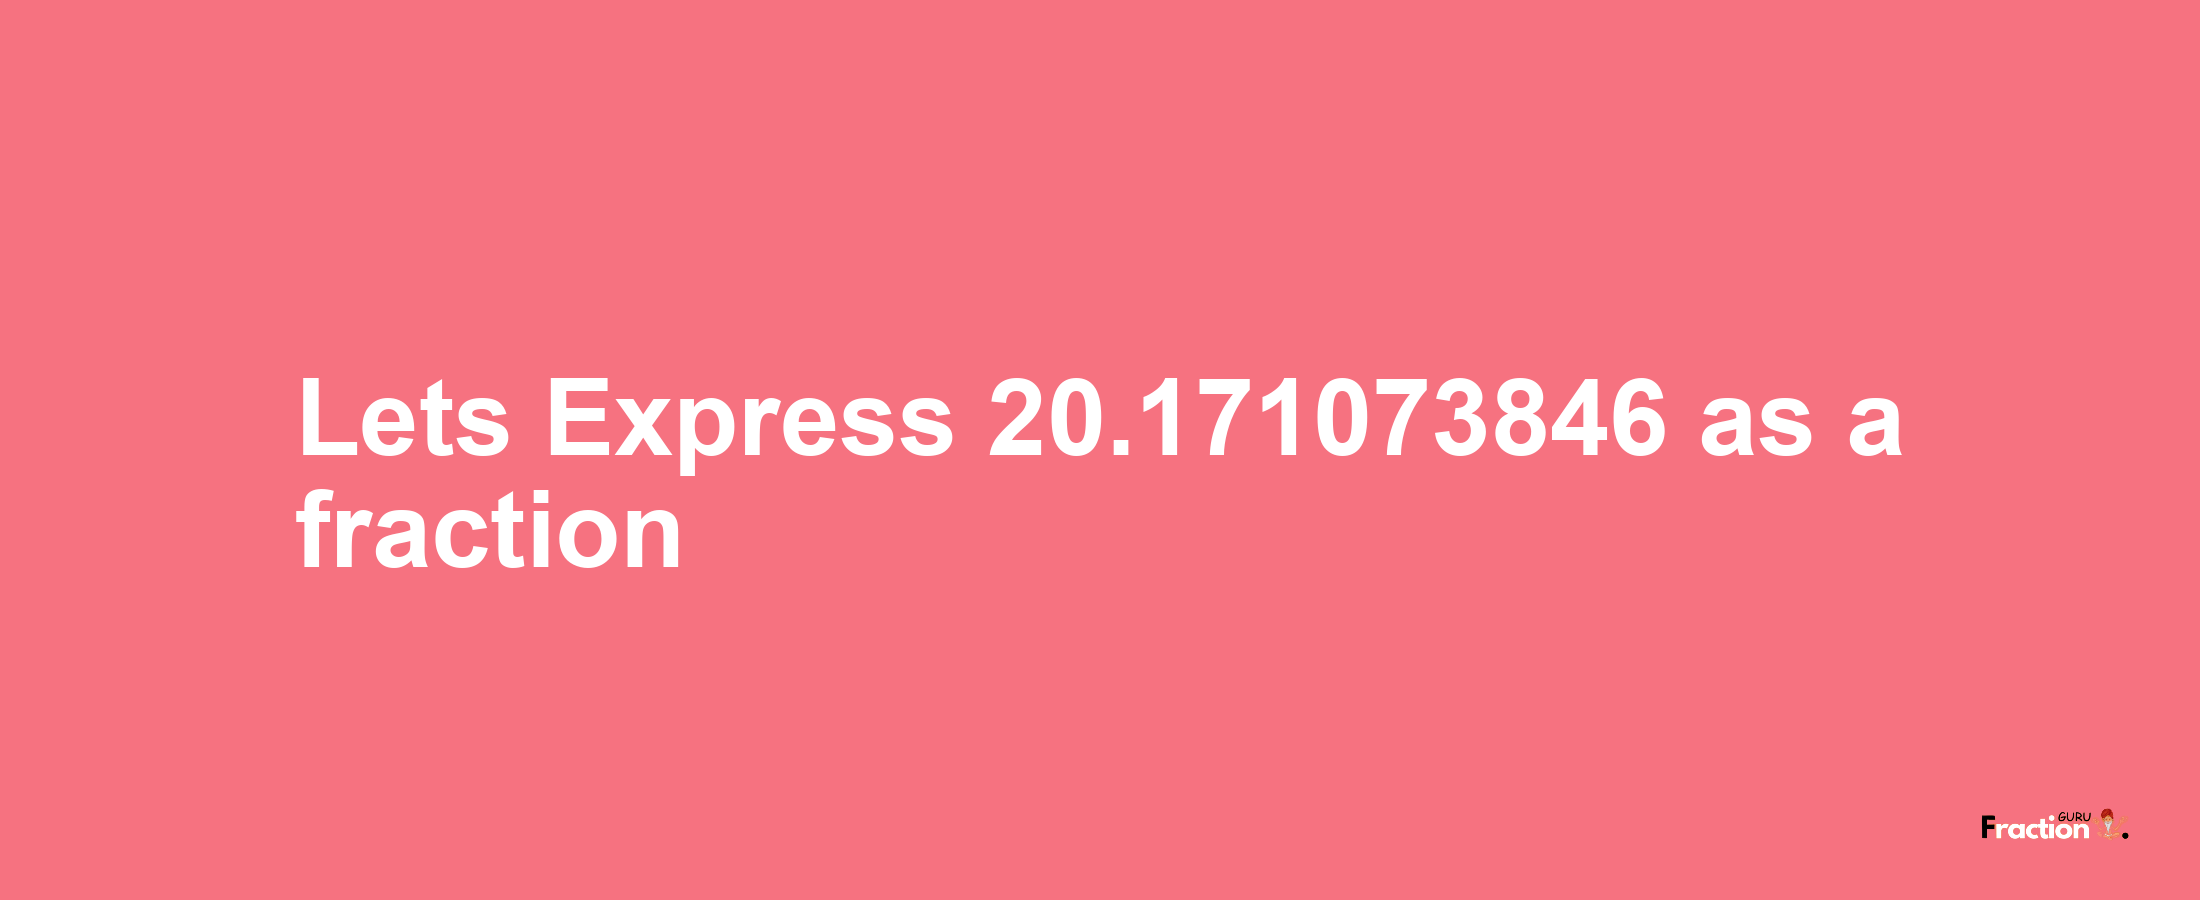 Lets Express 20.171073846 as afraction